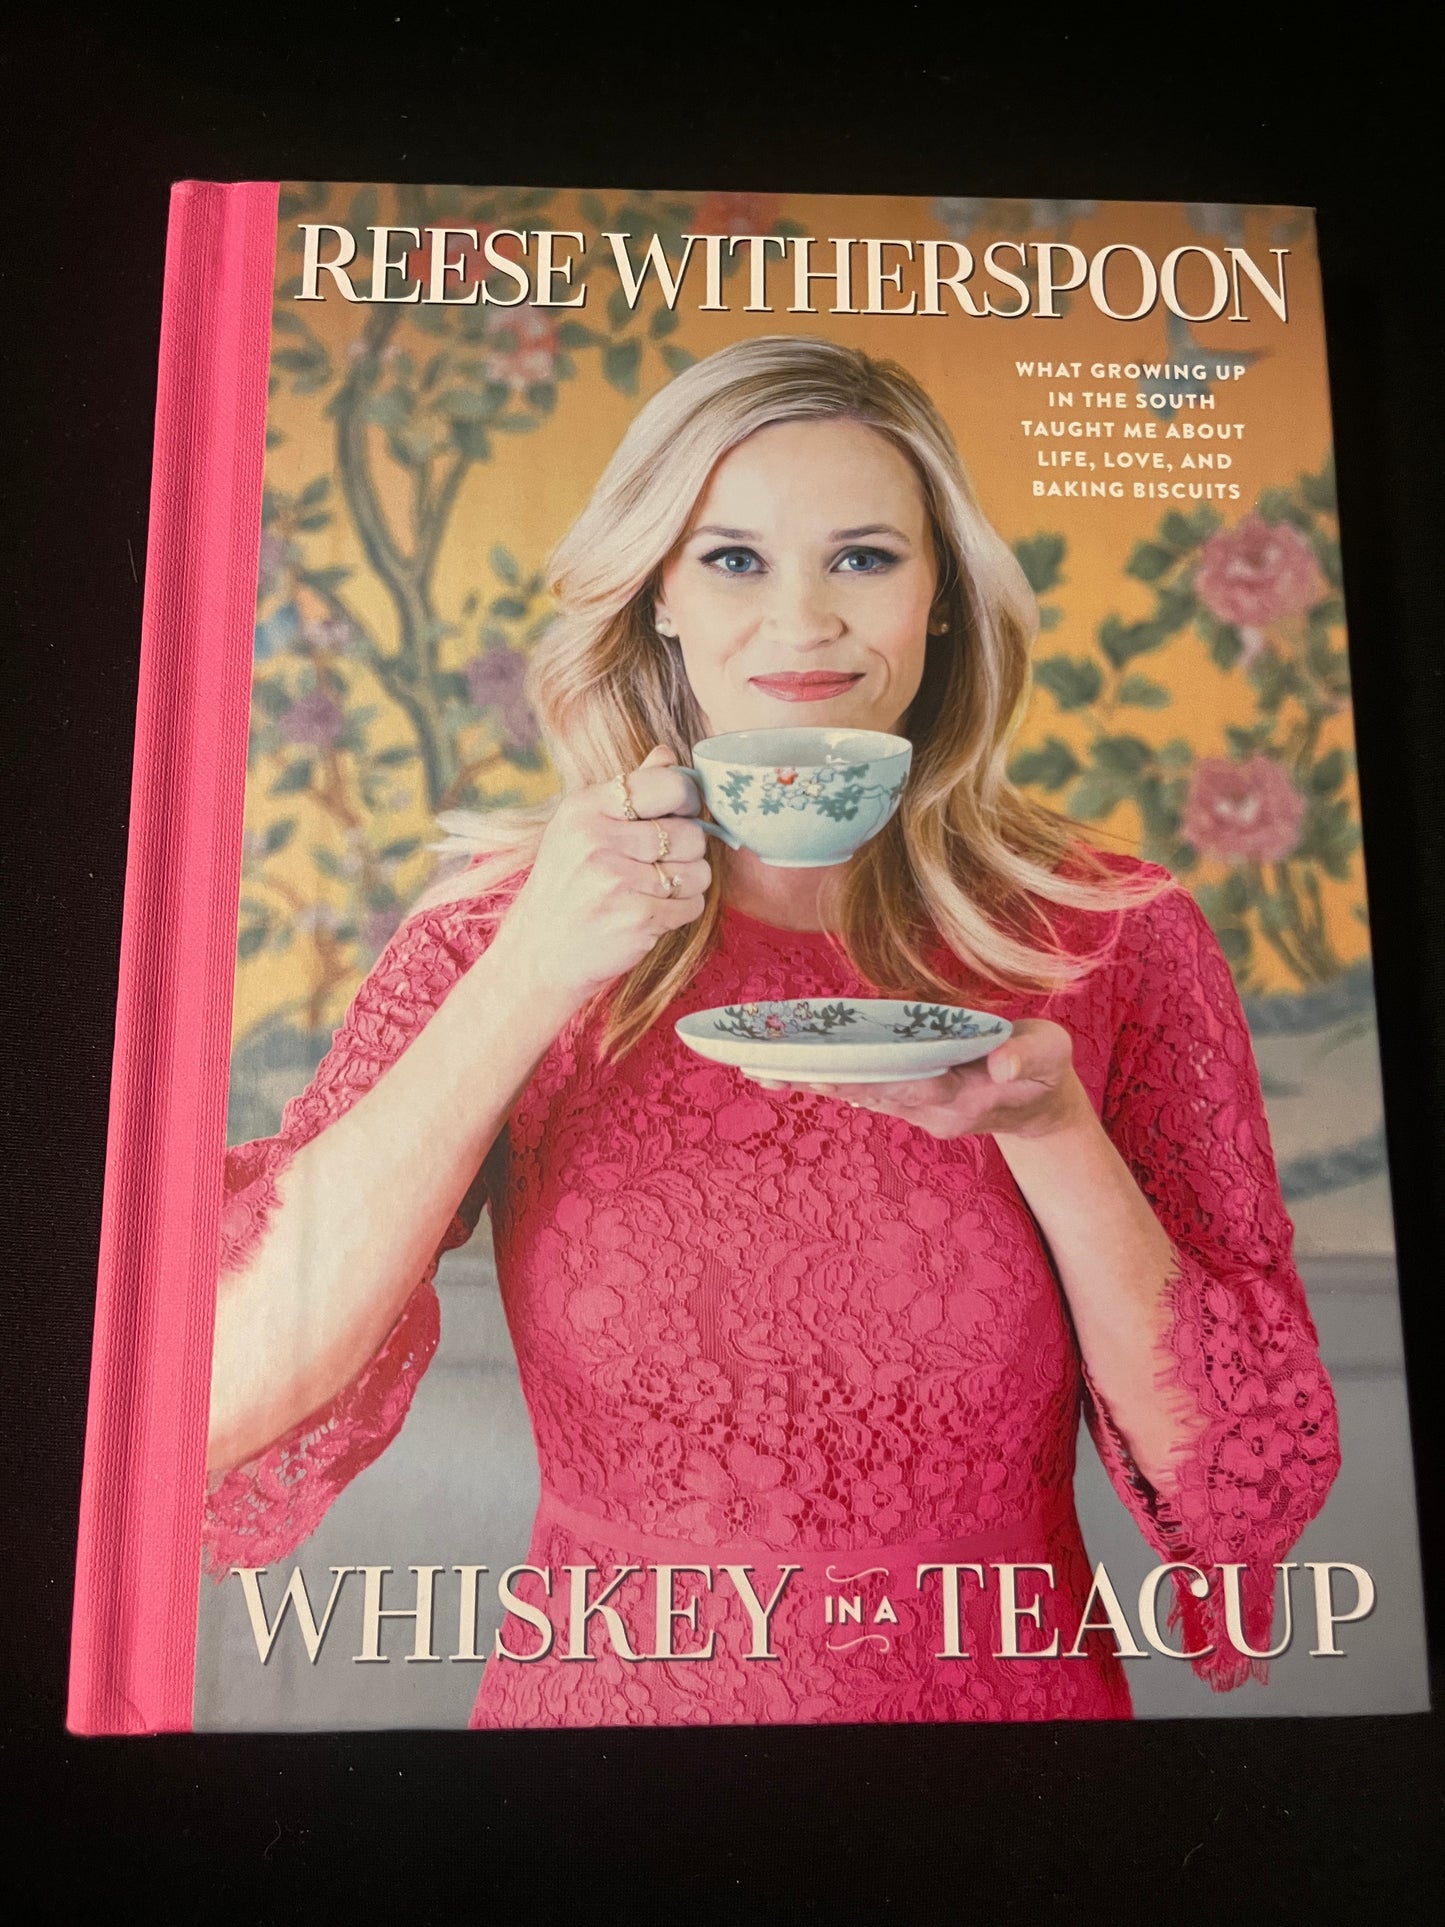 WHISKEY IN A TEACUP: WHAT GROWING UP IN THE SOUTH TAUGHT ME ABOUT LIFE, LOVE, AND BAKING BISCUITS by Reese Witherspoon